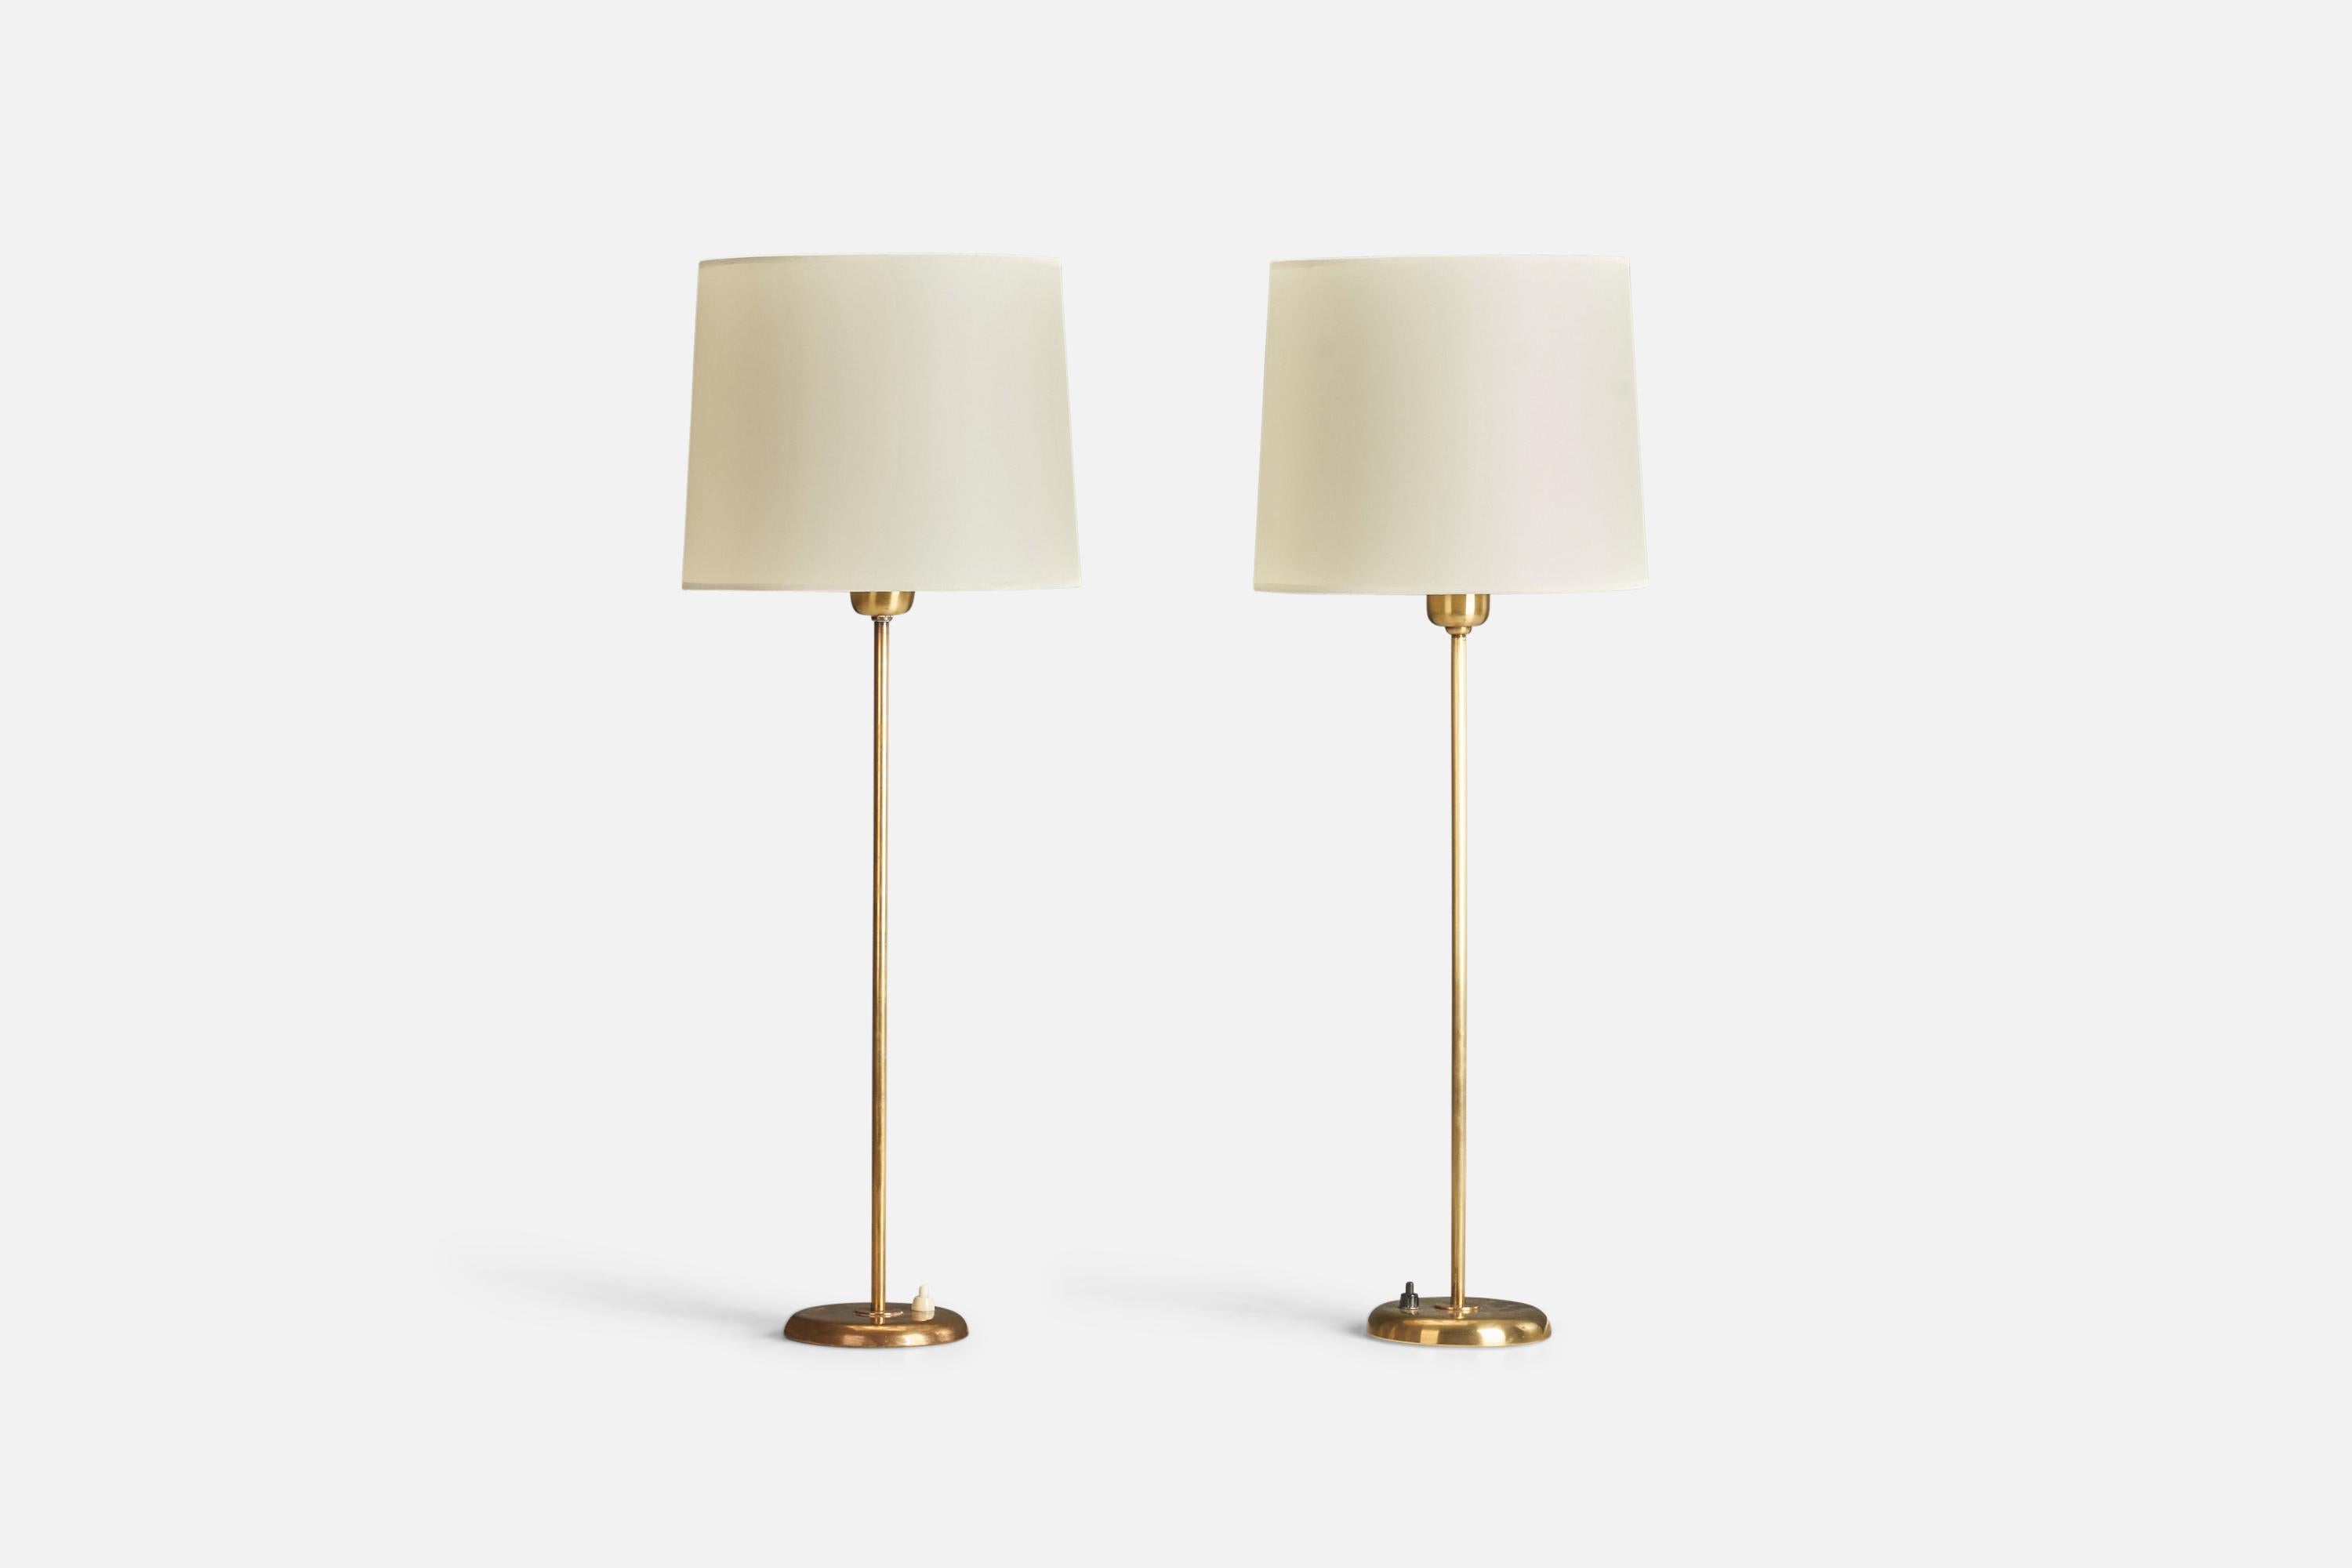 A pair of brass table lamps designed and produced by Böhlmarks, Sweden, 1940s.

Dimensions of lamp (inches) : 20.43 x 4.6 x 4.6 (Height x width x depth)
Dimensions of lampshade (inches) : 9 x 10 x 8.25 (Top Diameter x bottom diameter x